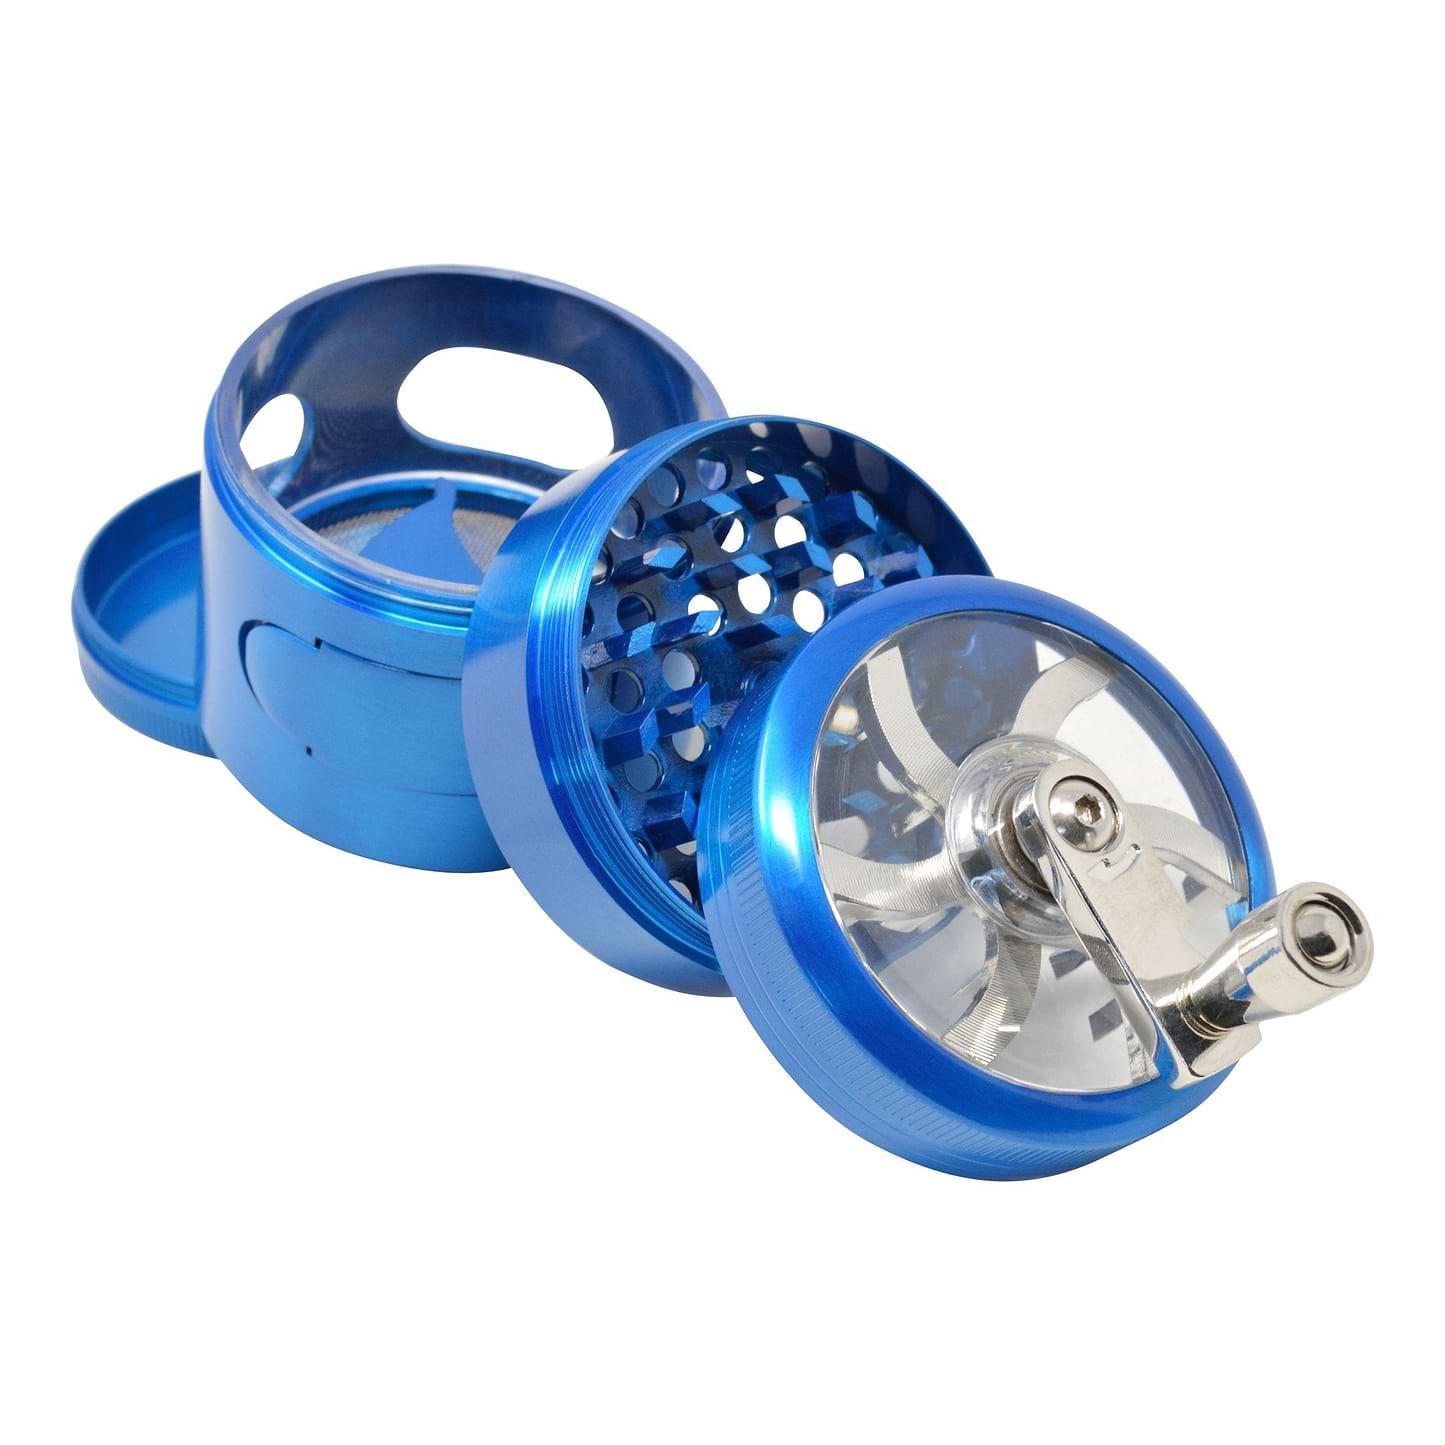 Full shot of the 4-piece shiny blue 56mm dubs grinder smoking accessory with hand crank mechanical sharpener look